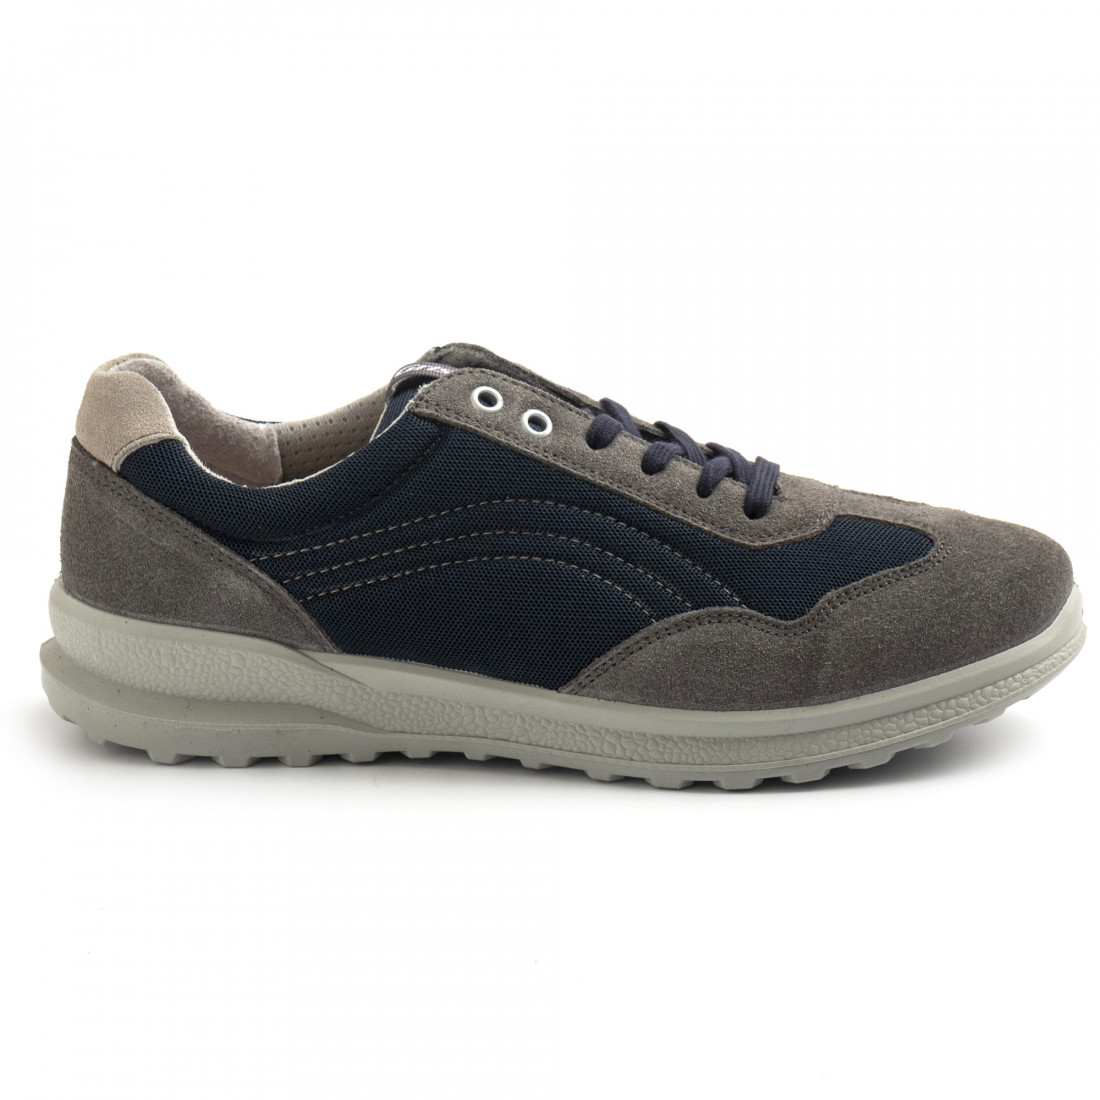 Grisport 43346 men's sneaker in gray suede and blue fabric